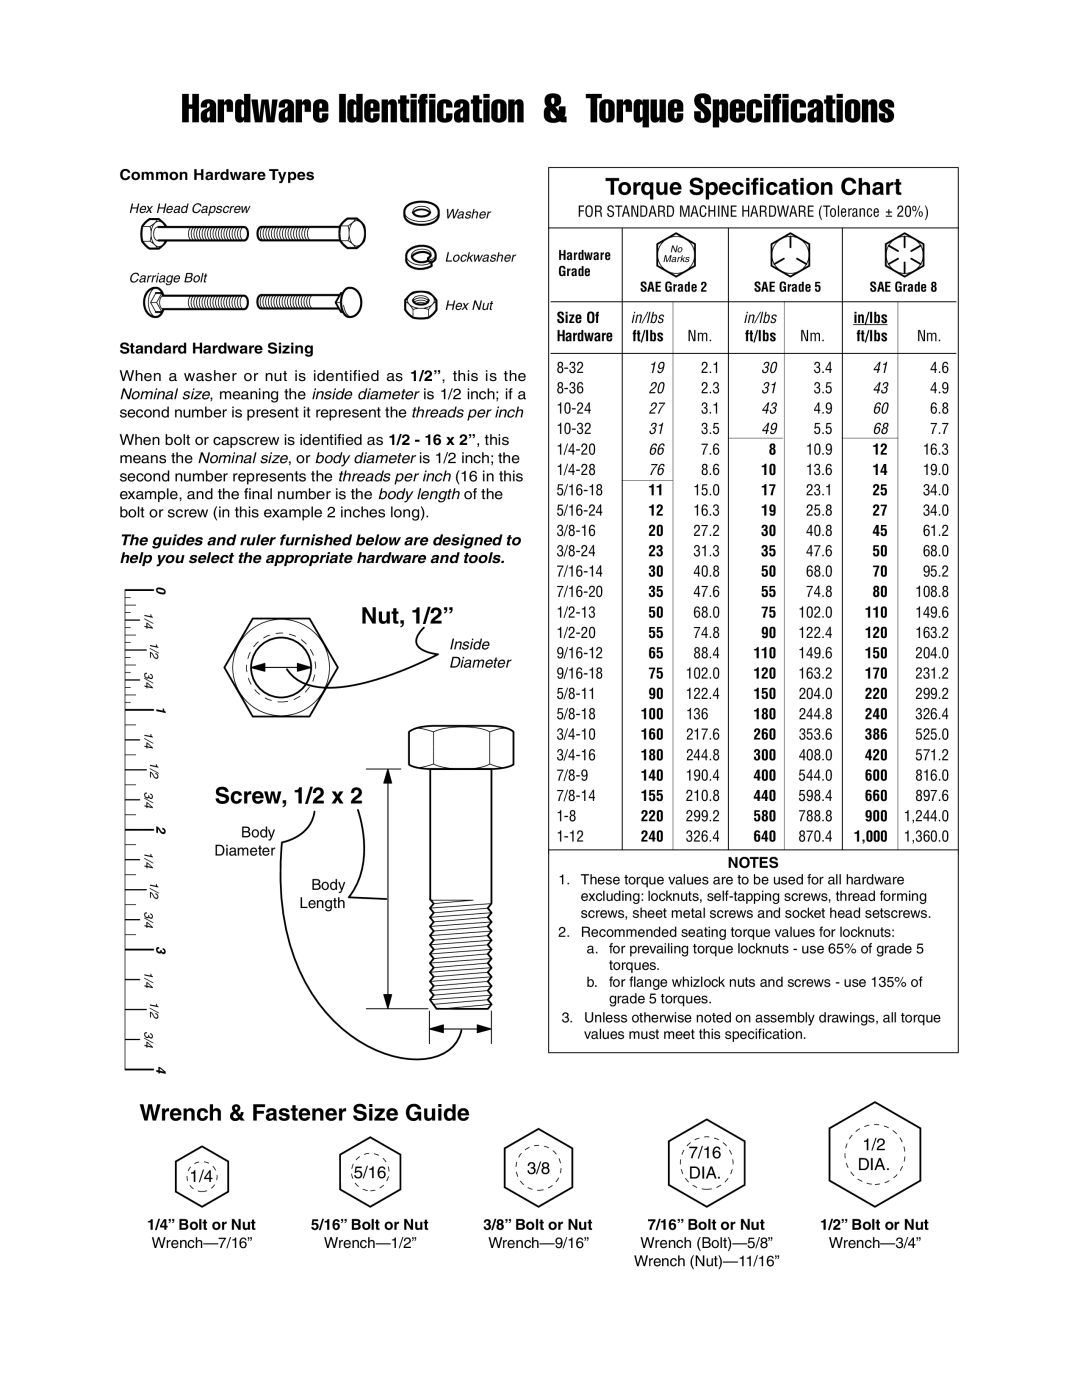 Simplicity 1695067 Wrench & Fastener Size Guide, Hardware Identification & Torque Specifications, Nut, 1/2”, Screw, 1/2 